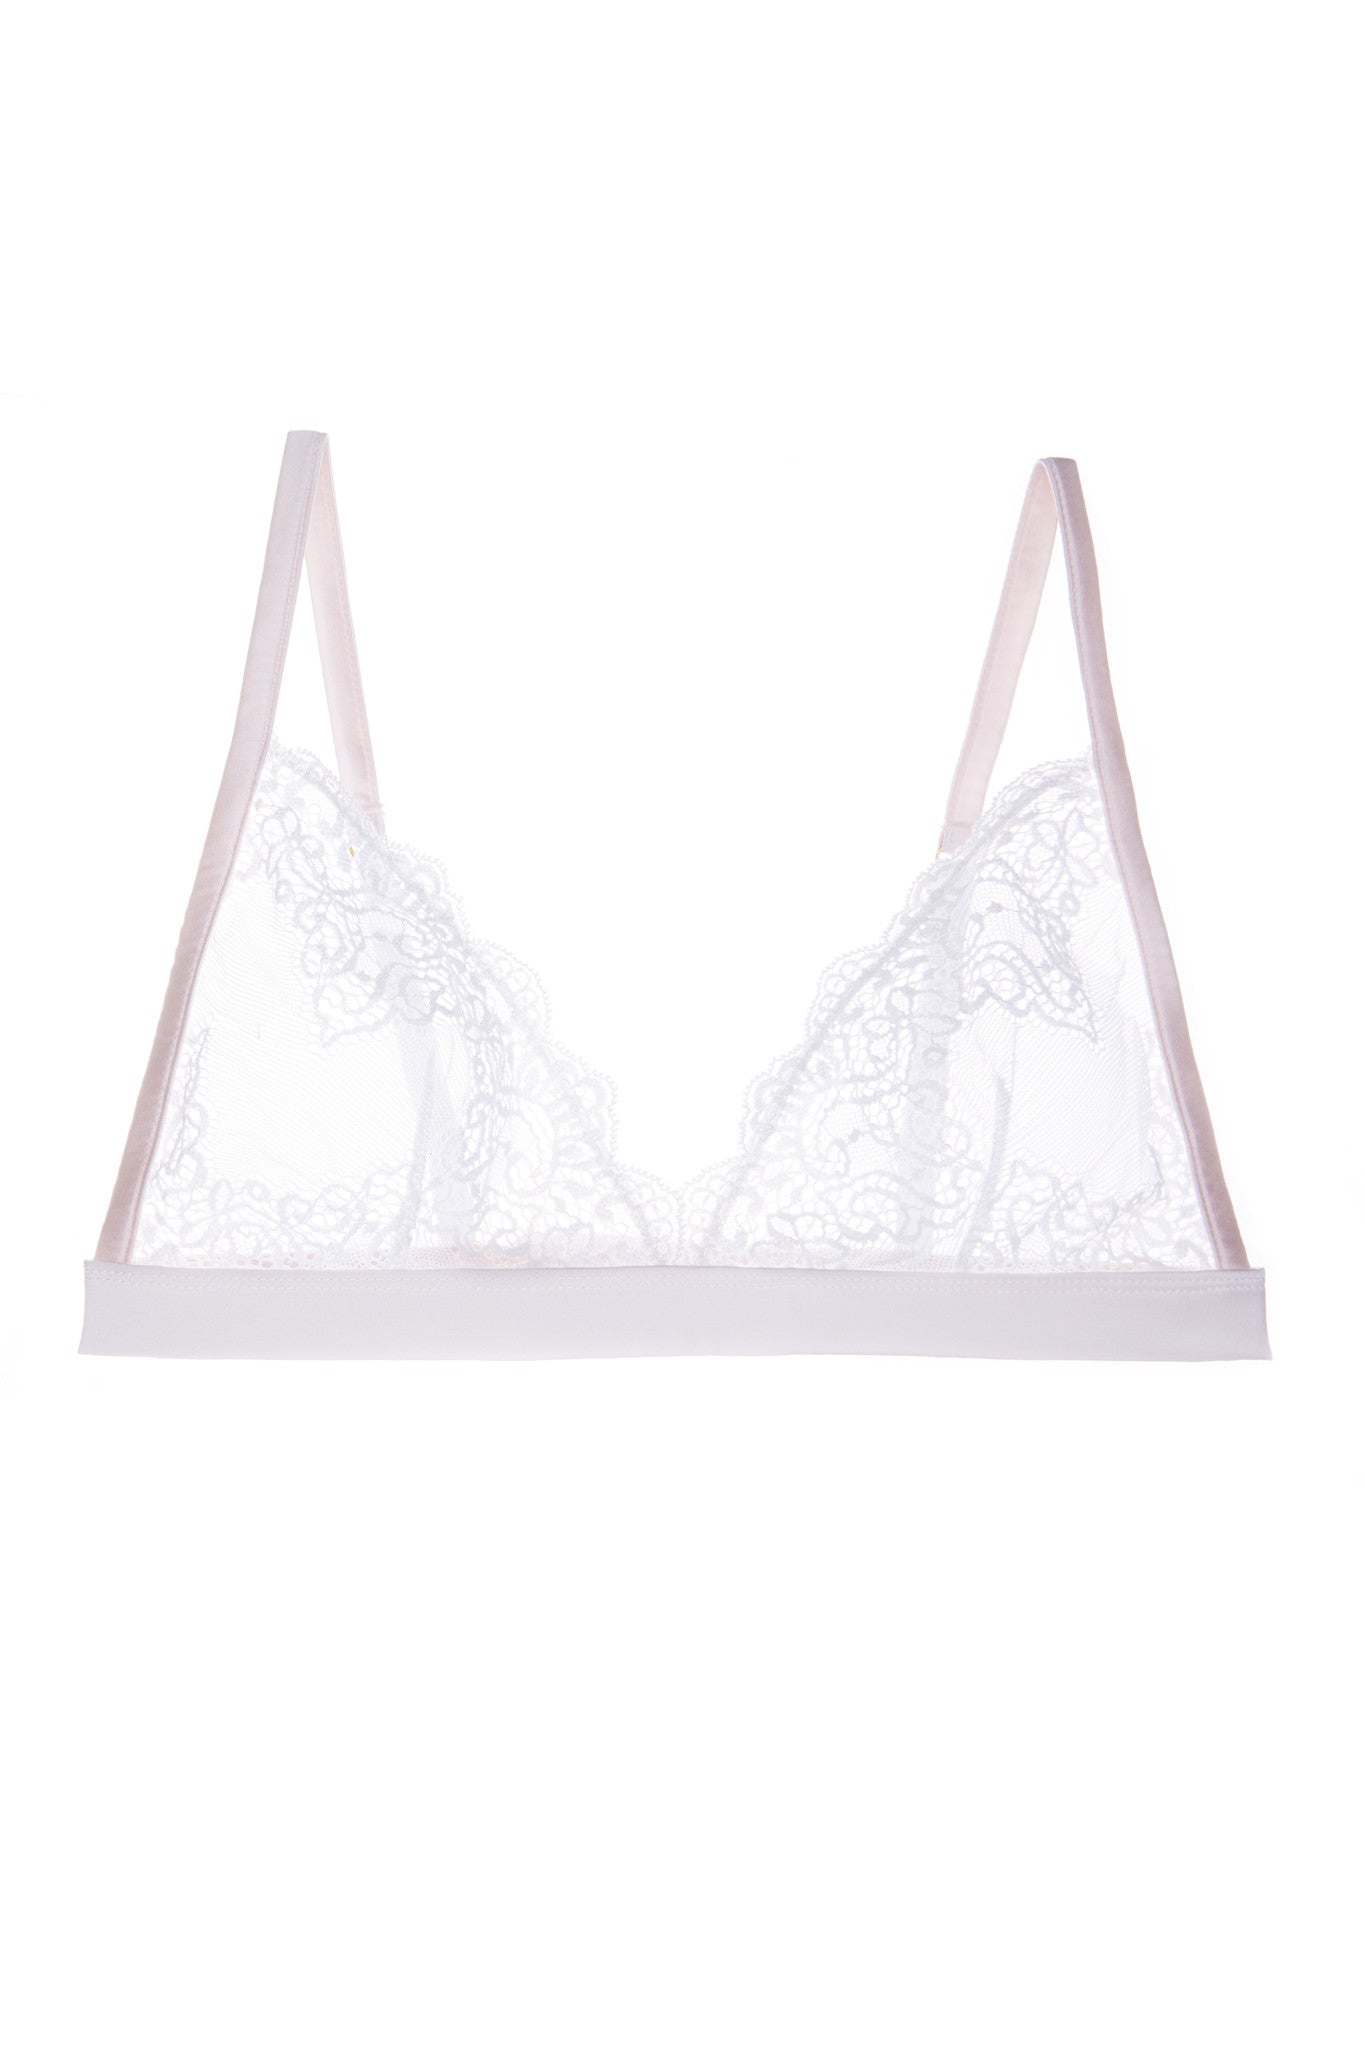 Workingirls Lingerie  Mr Whippy Soft Cup Bra by Mimi Holliday